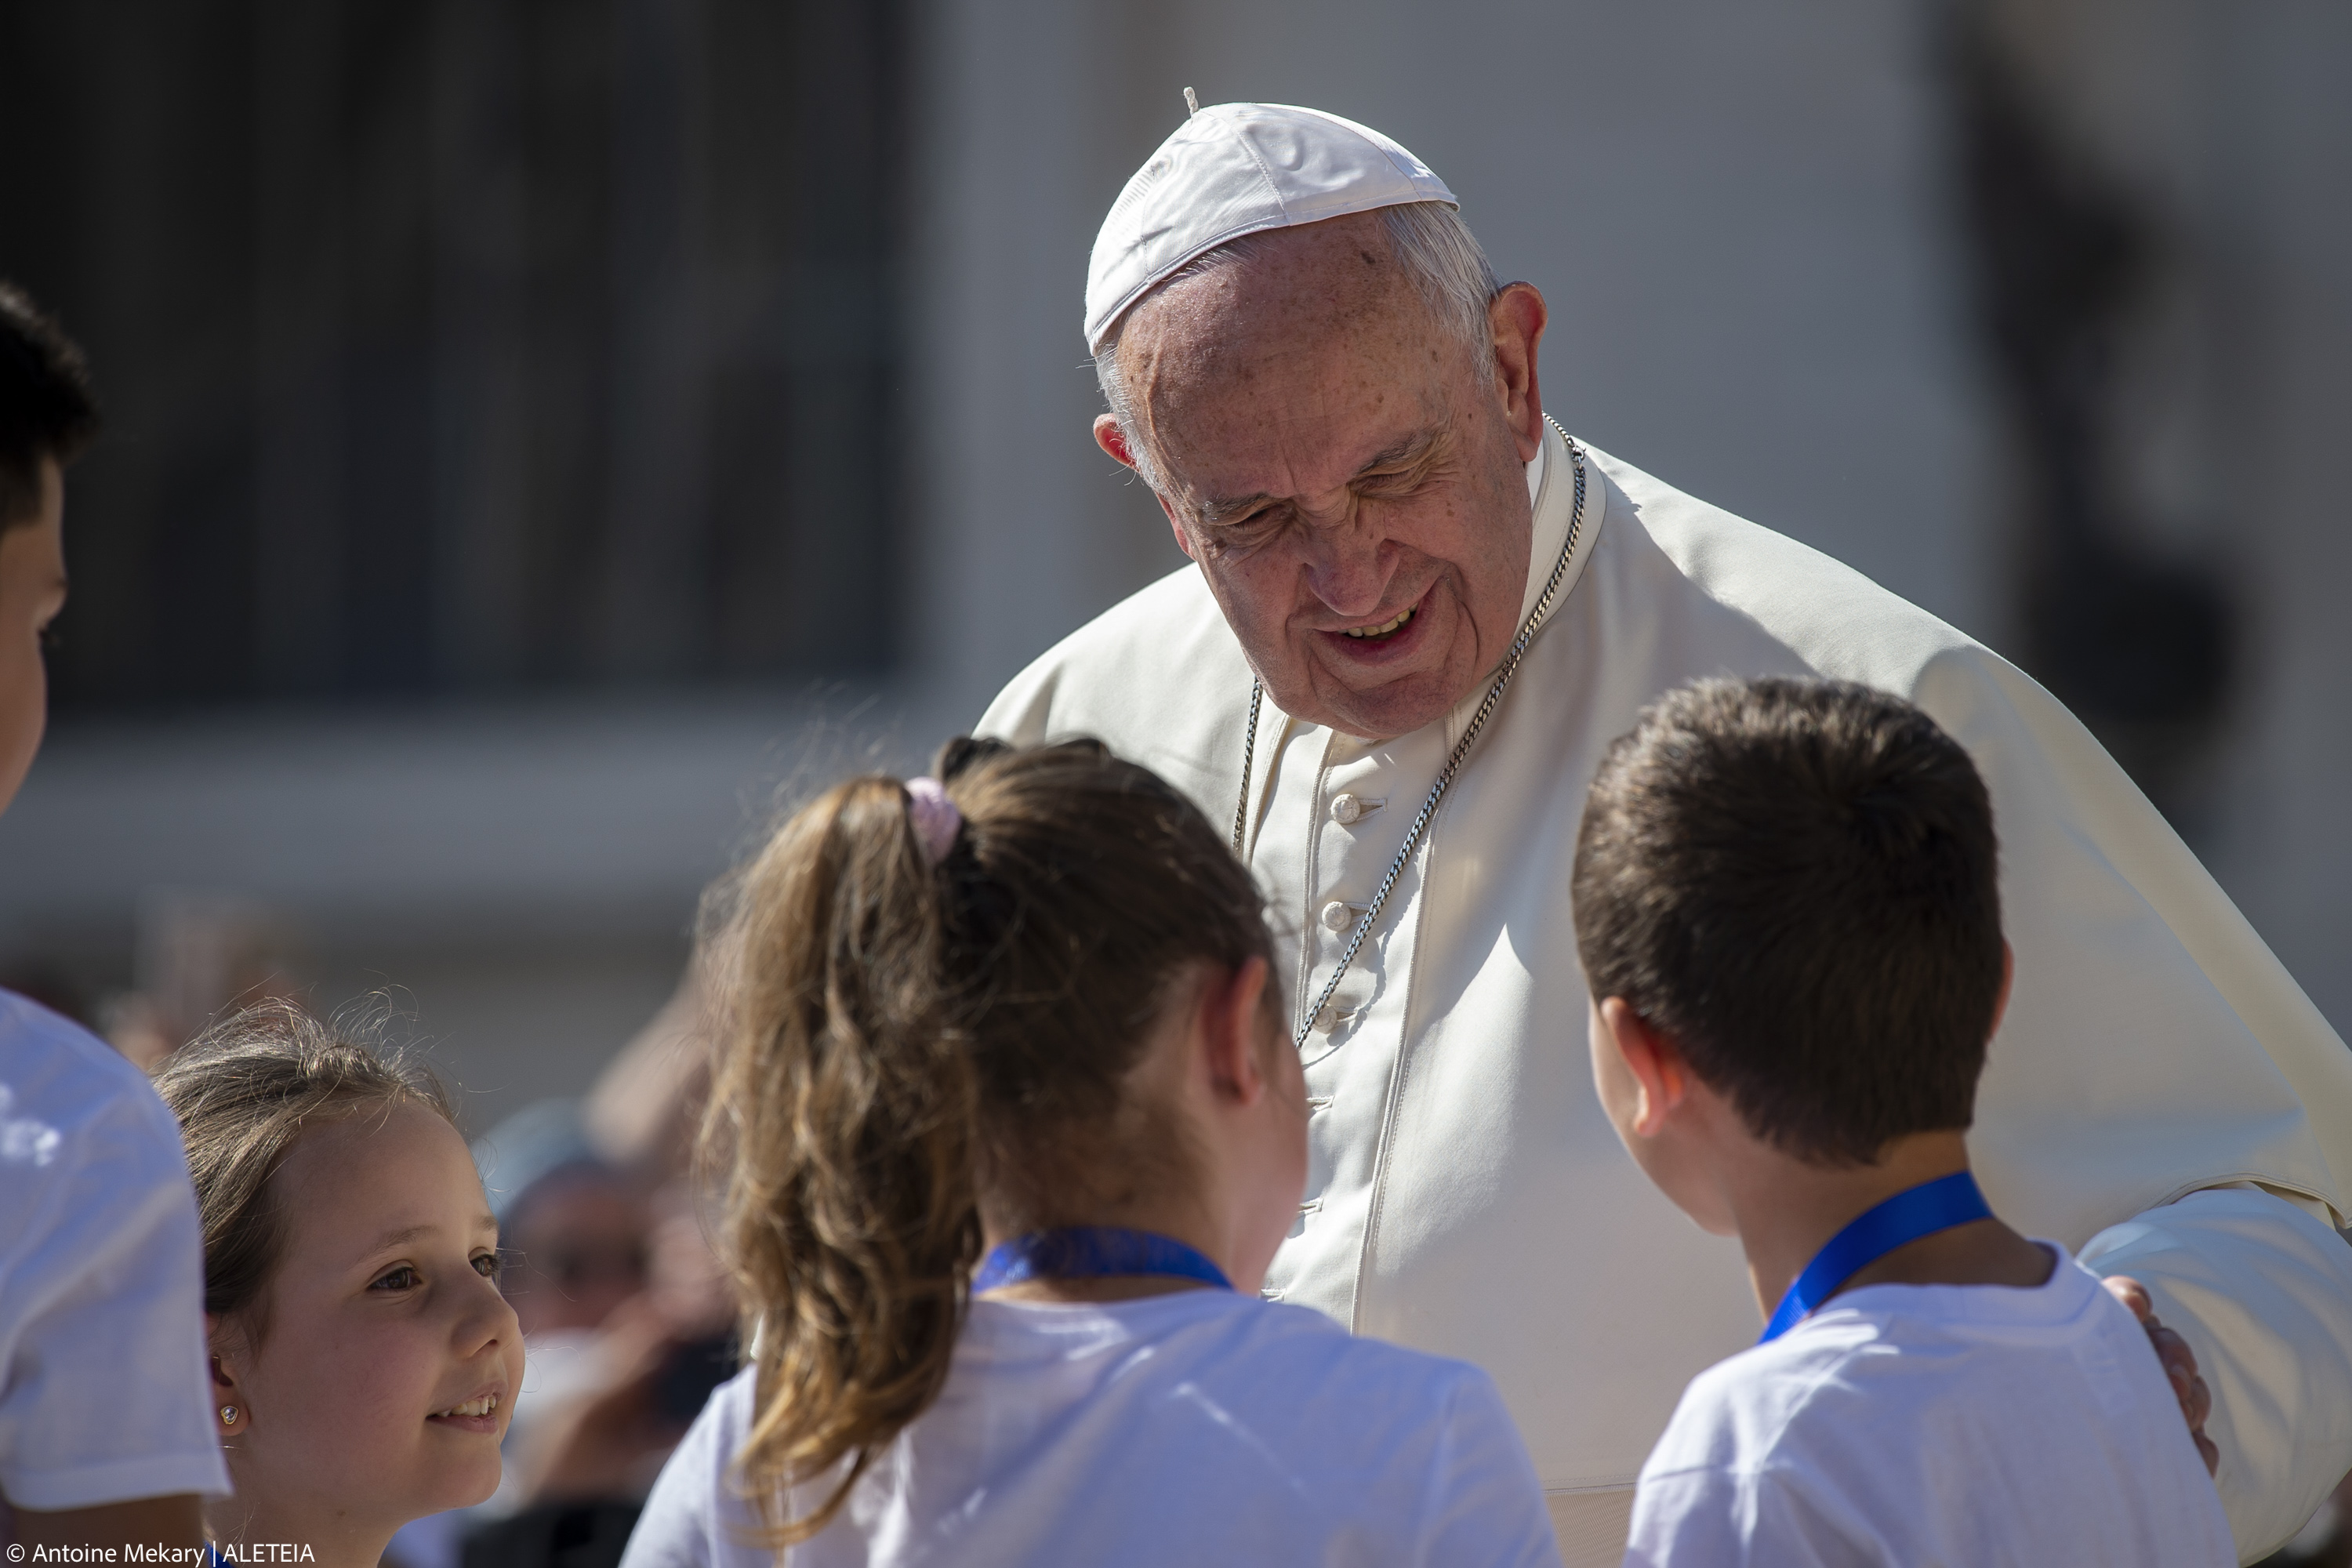 Pope Francis meets children as he arrives for his weekly general audience in St. Peter's Square at the Vatican